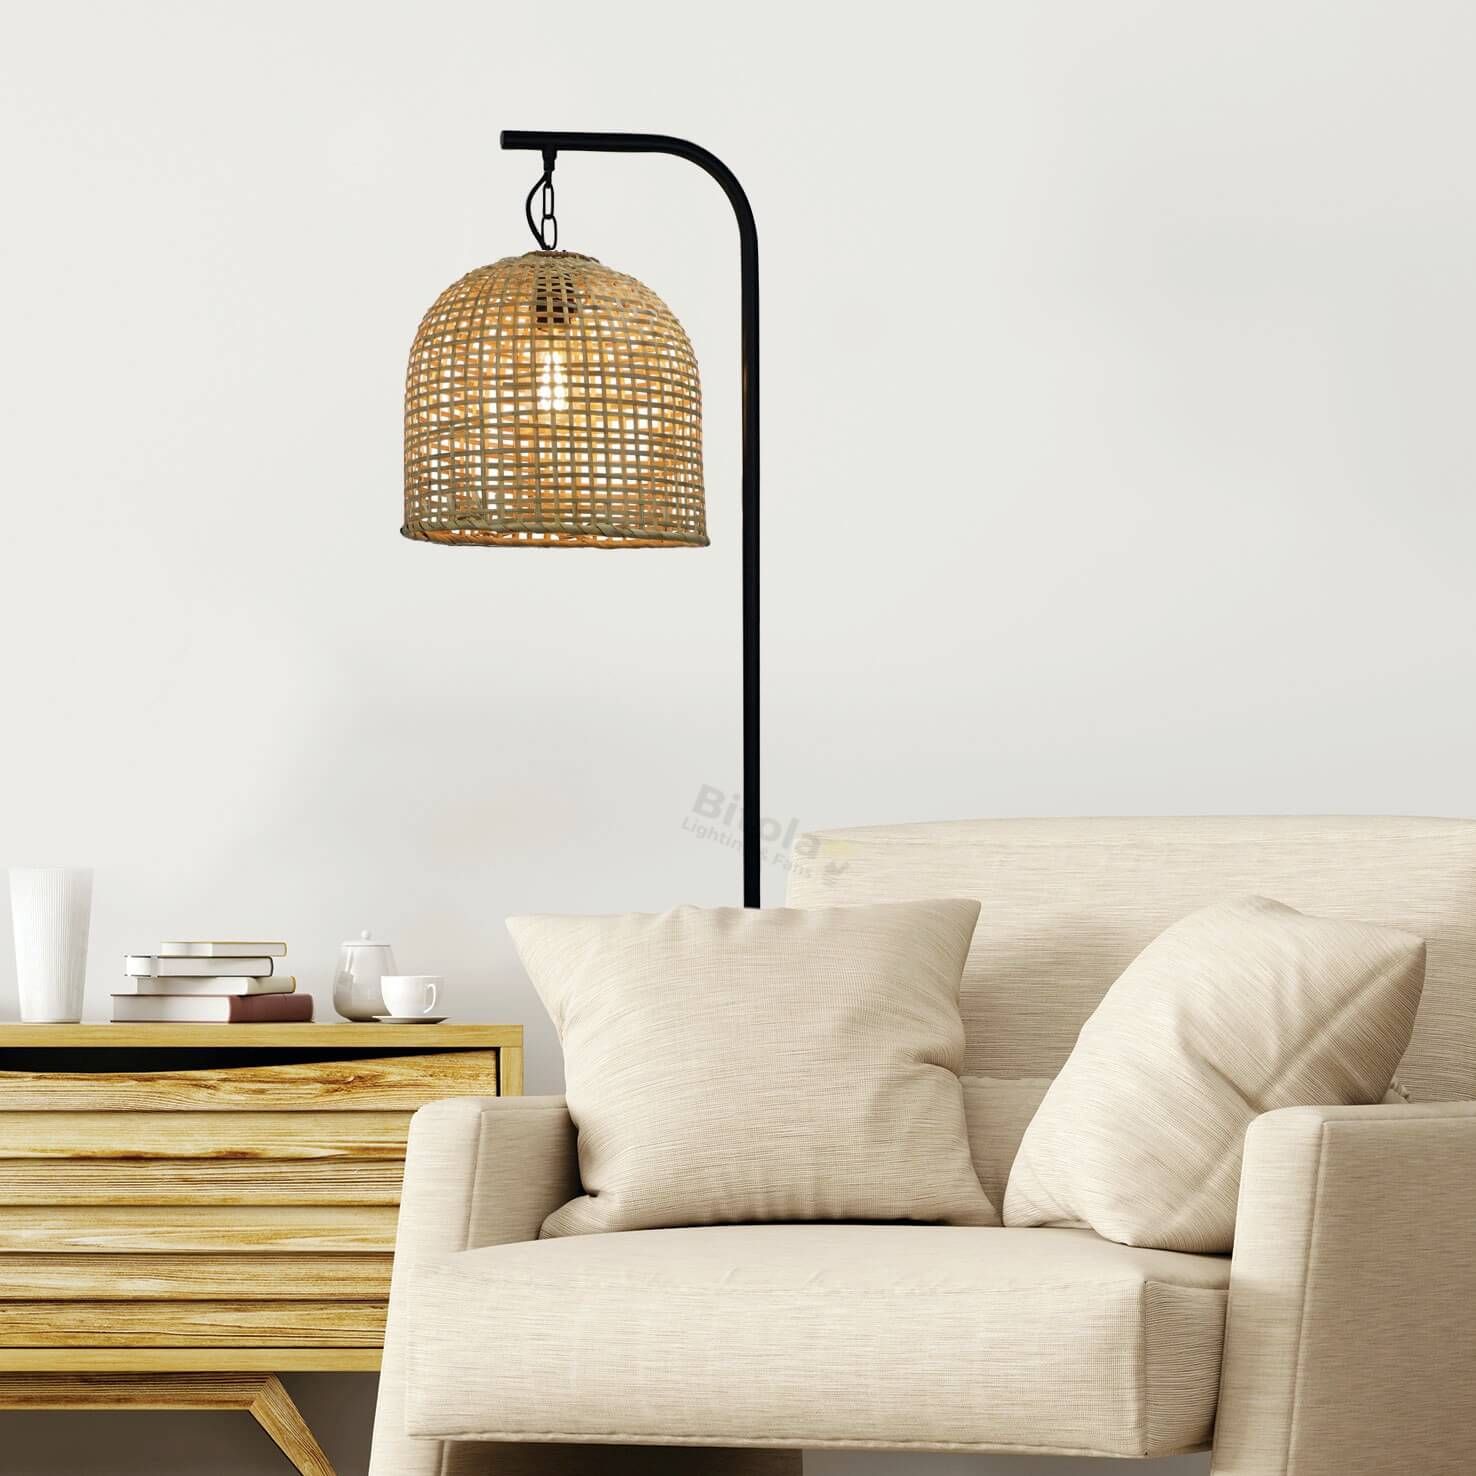 Watson Rattan Floor Lamp With Hanging Chain – Bitola Lighting And Fans In Rattan Floor Lamps (View 7 of 15)